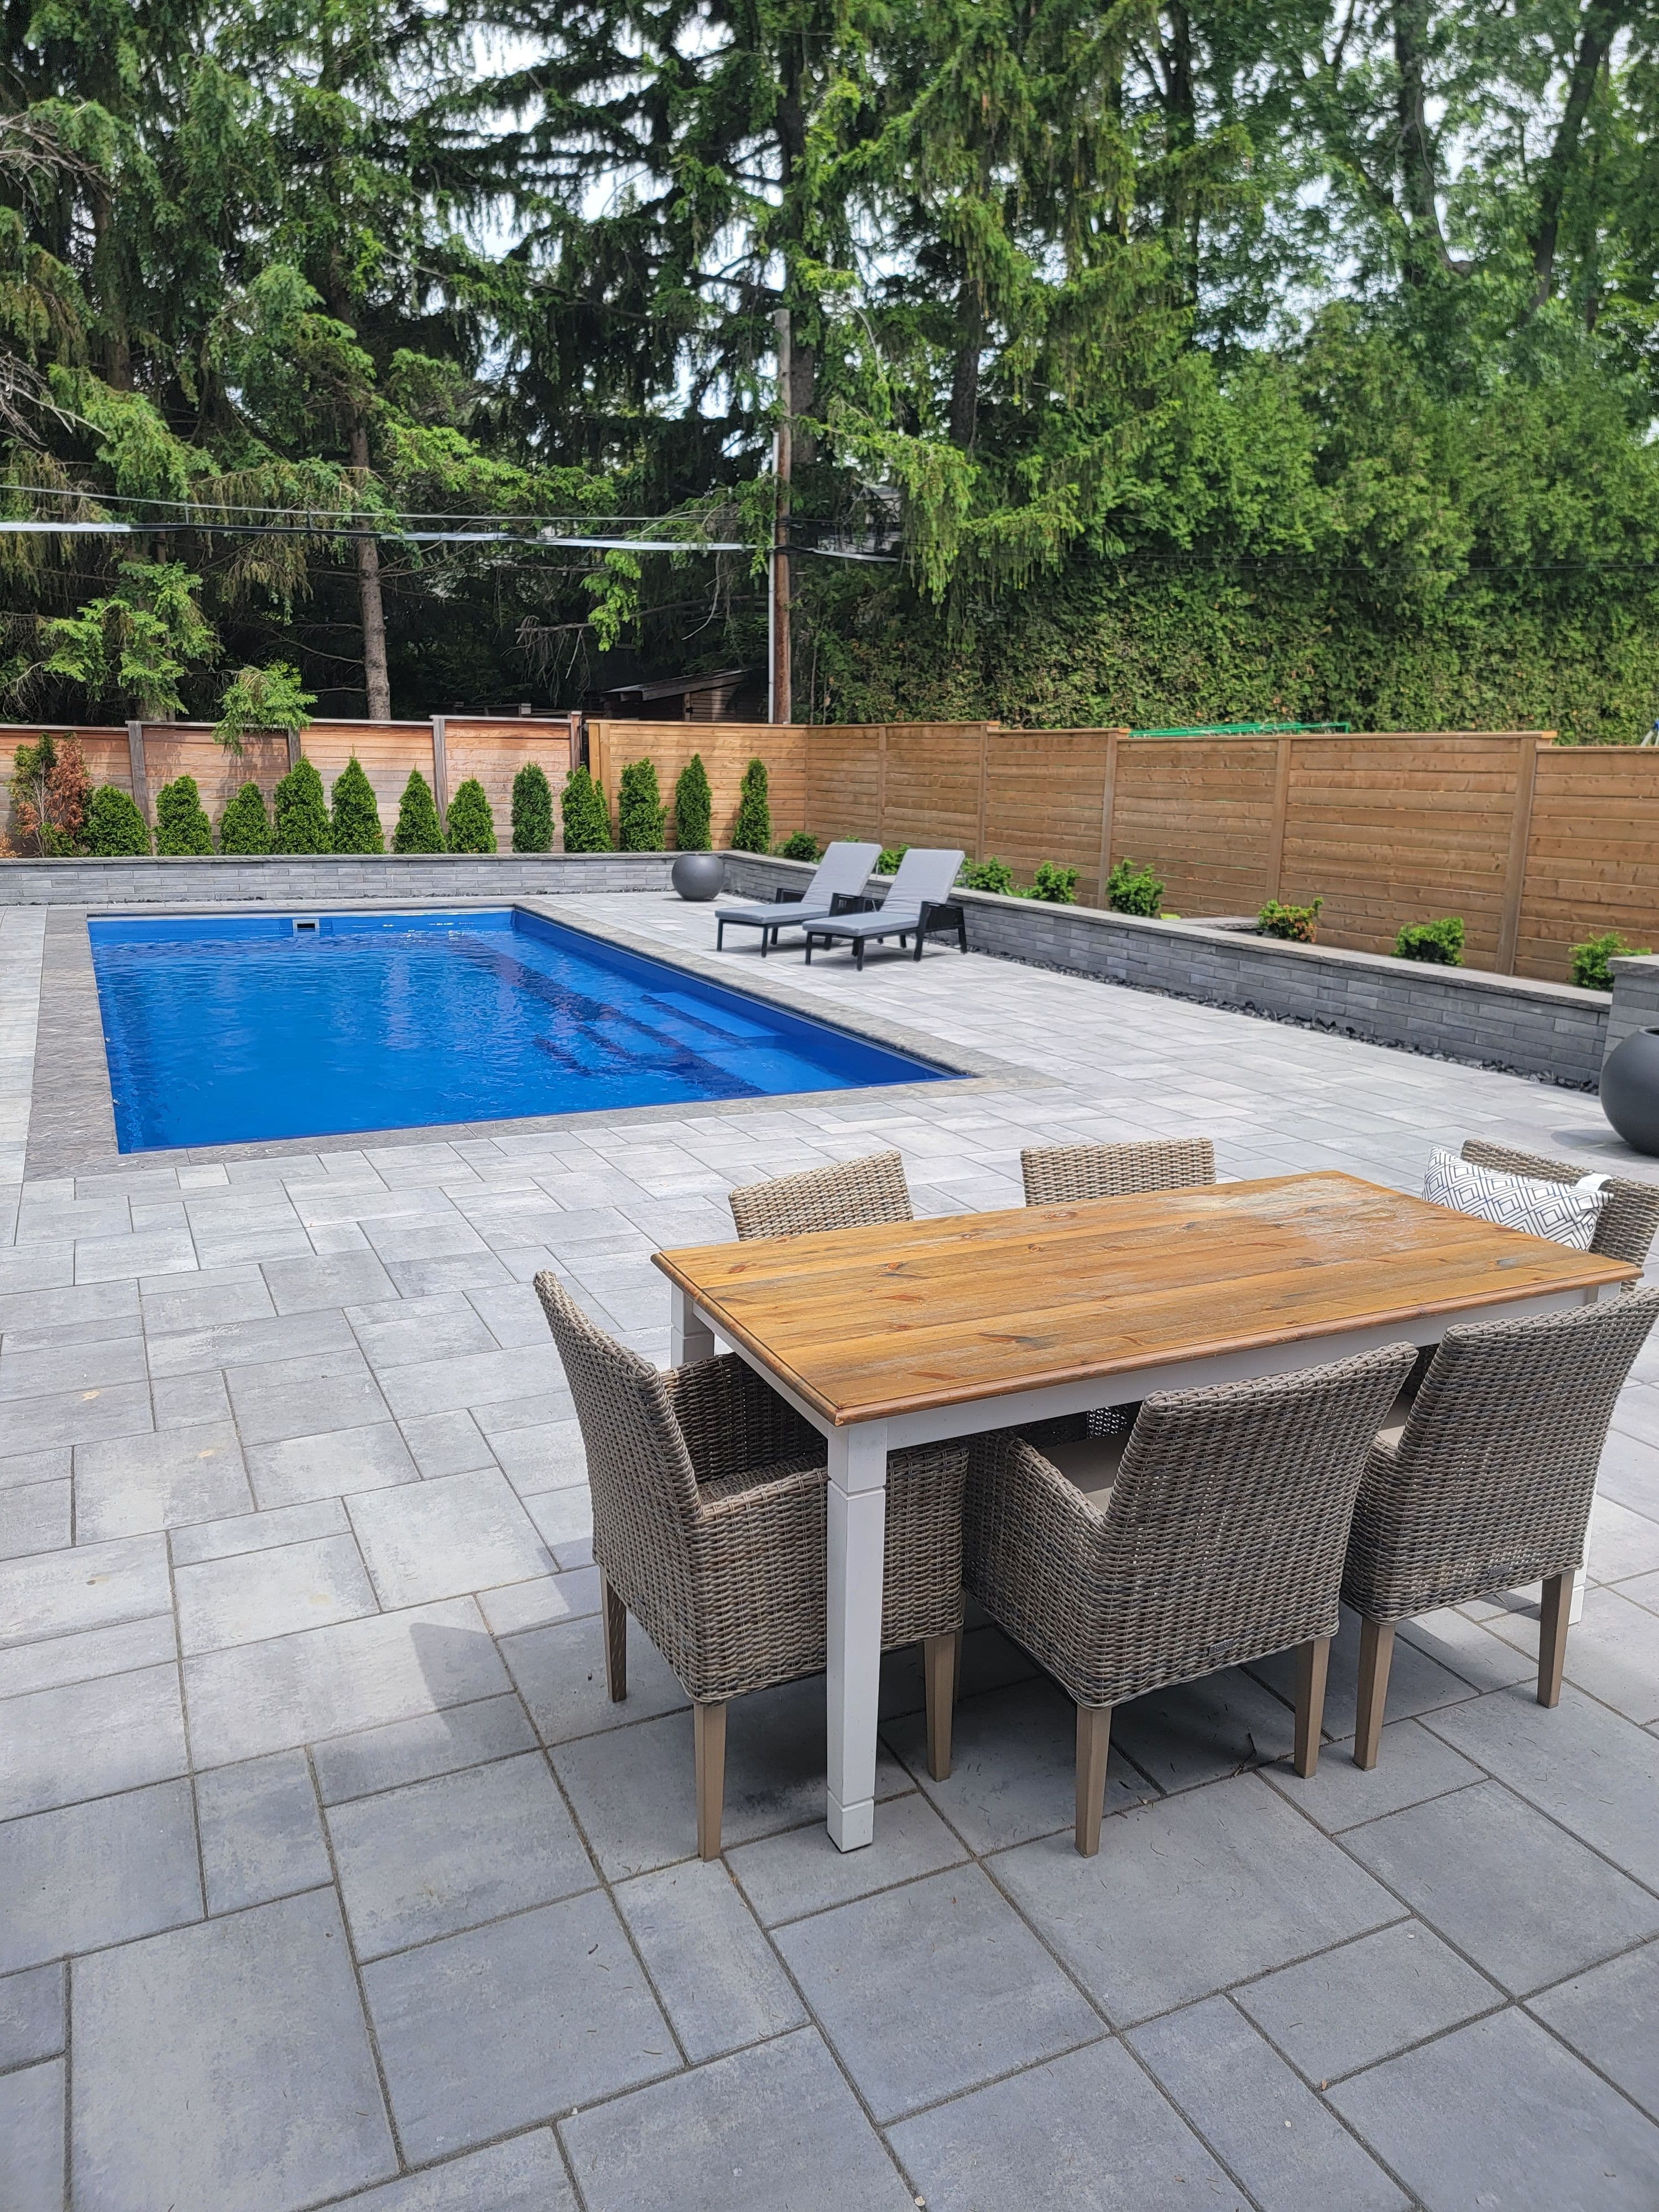 Swimmimg pool with patio and wood fence